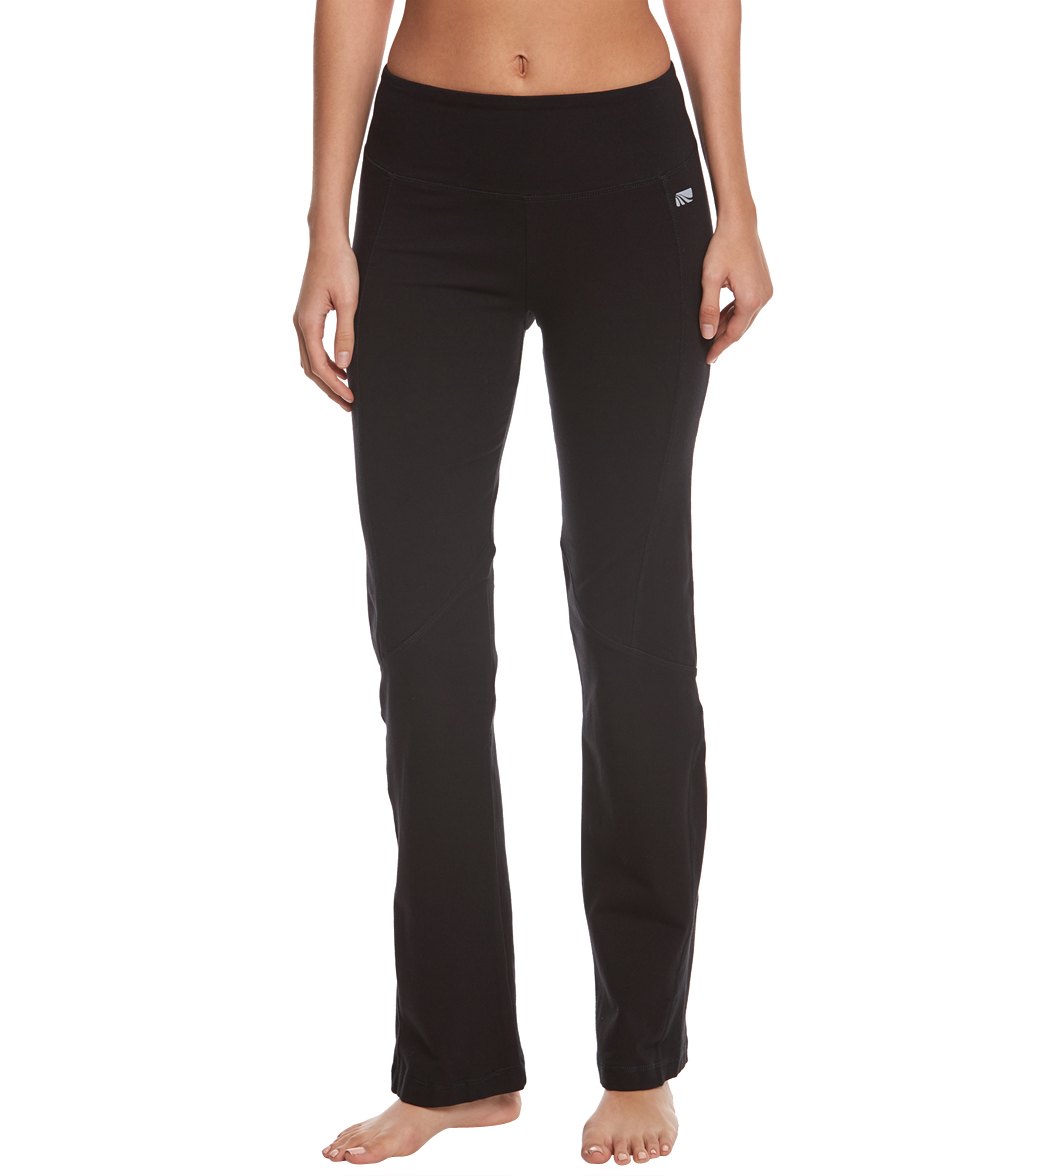 Best Thigh Slimming Leggings for a Skinny Look - Fitop